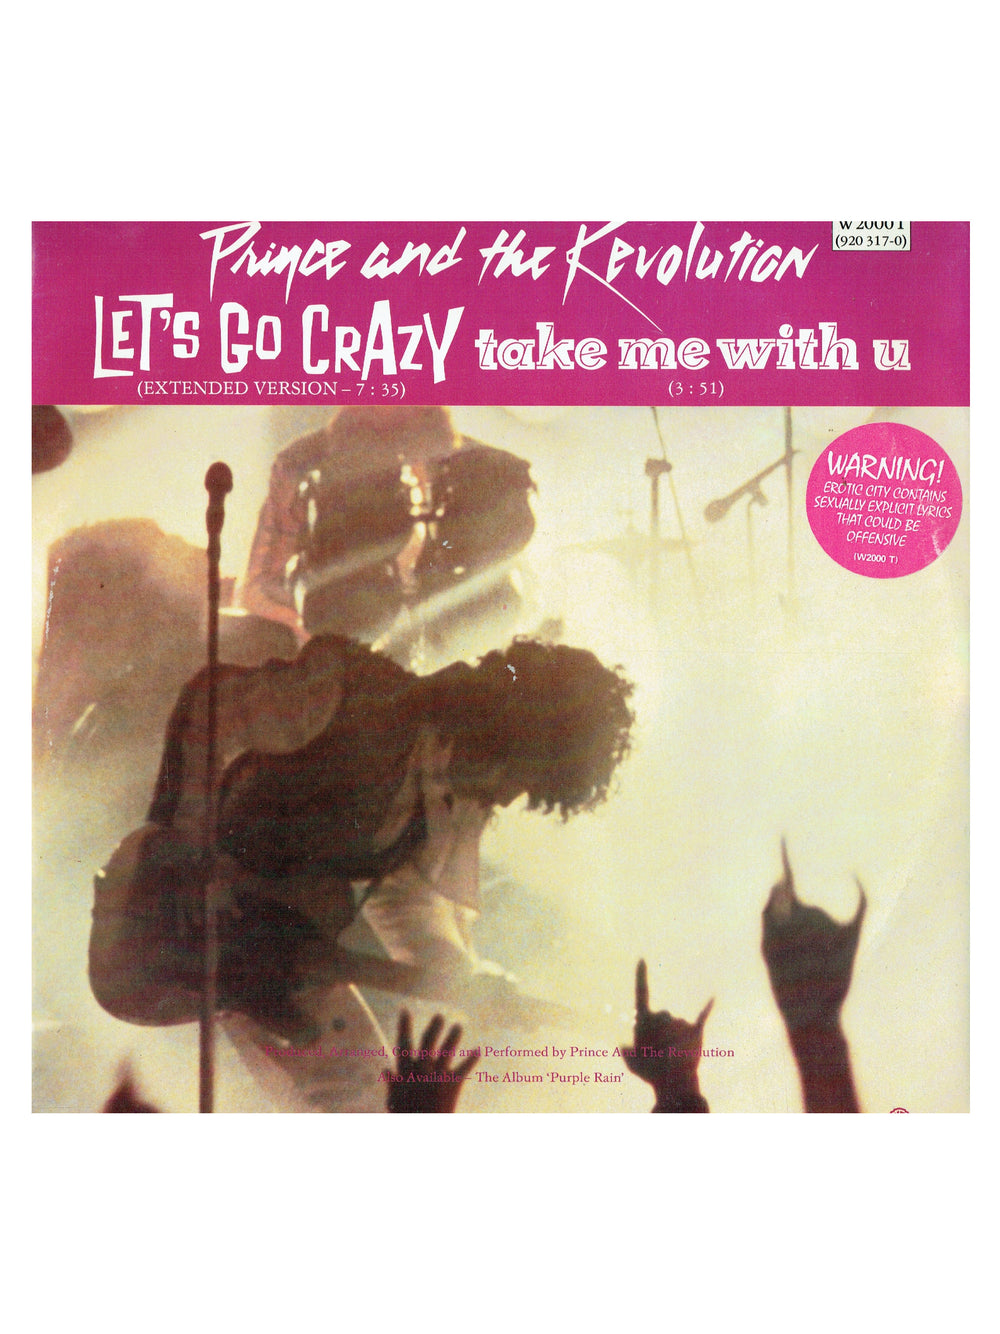 Prince Let's Go Crazy Take Me With U Erotic City UK 12 Inch Vinyl W200T HYPE